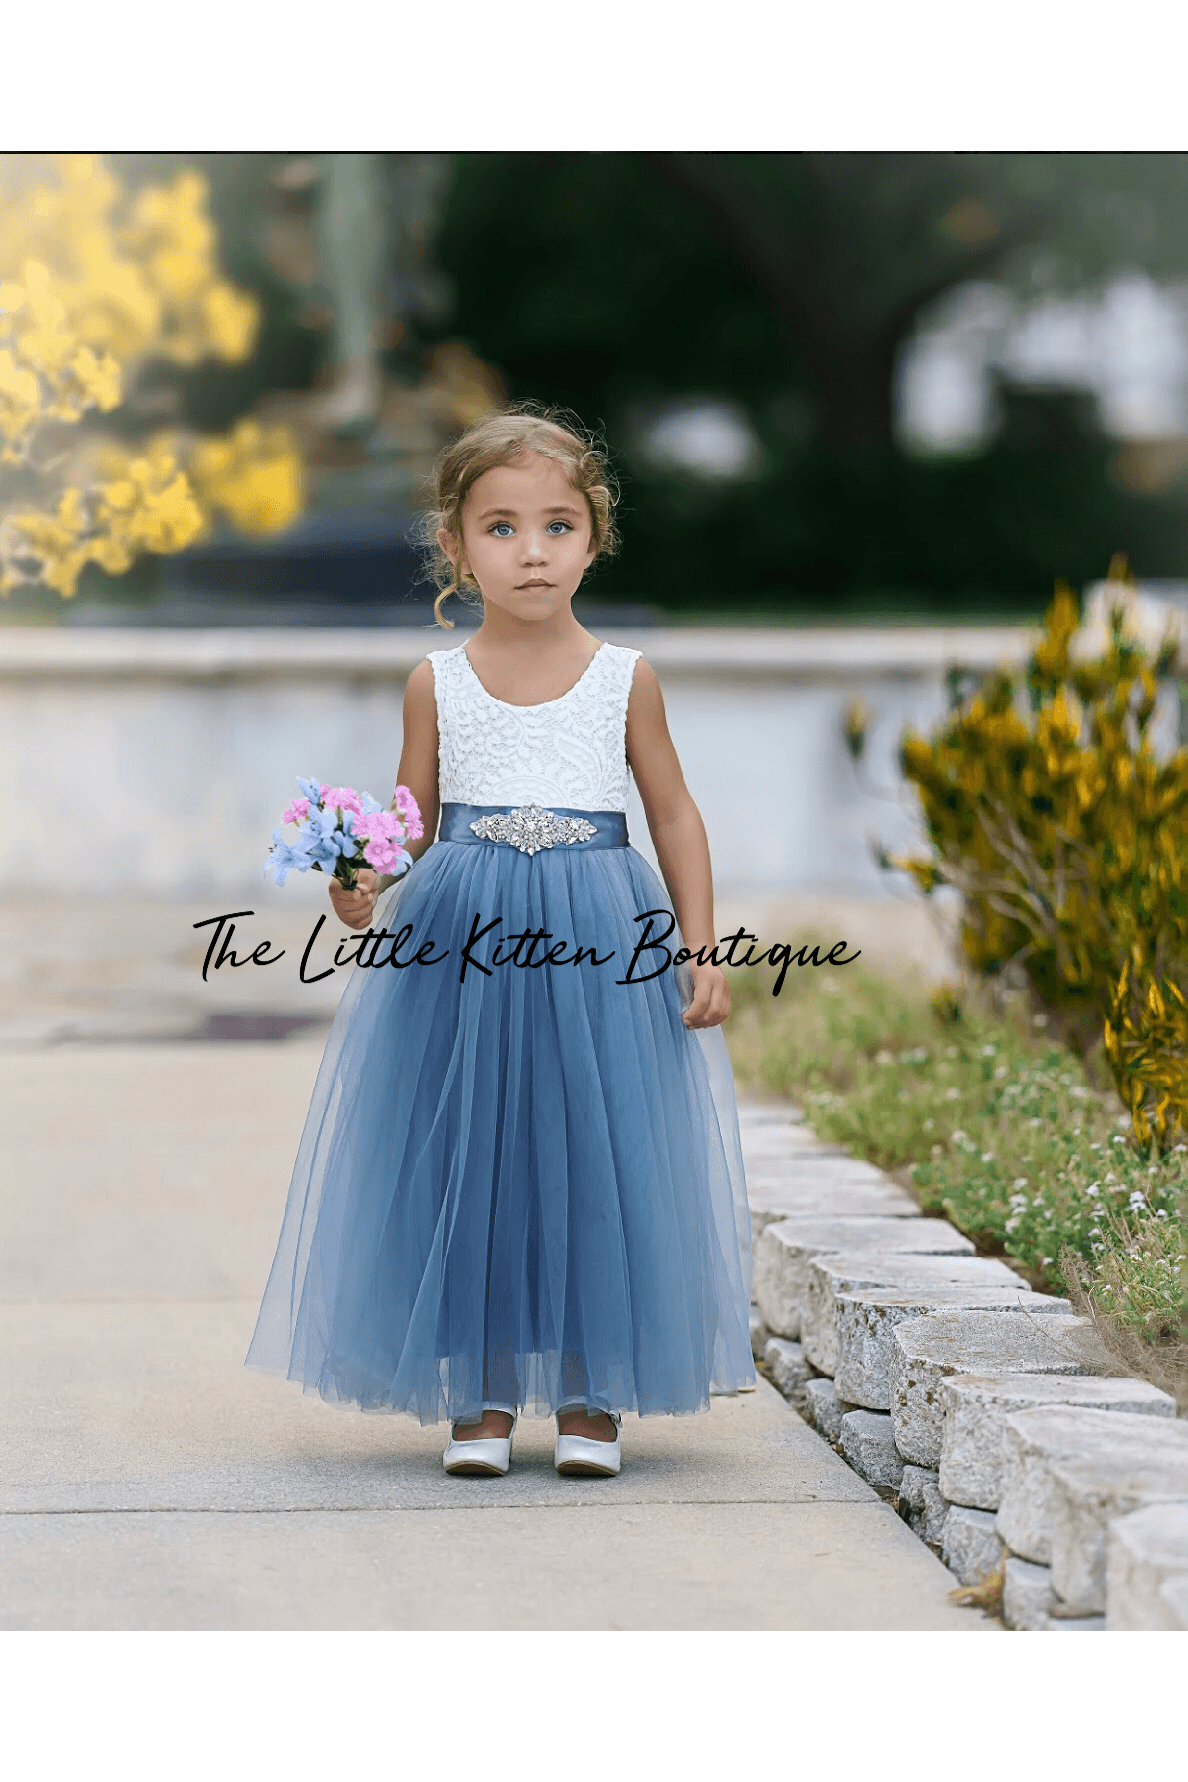 Sleeveless Lace and Tulle Flower Girl Dress - The Little Kitten Boutique